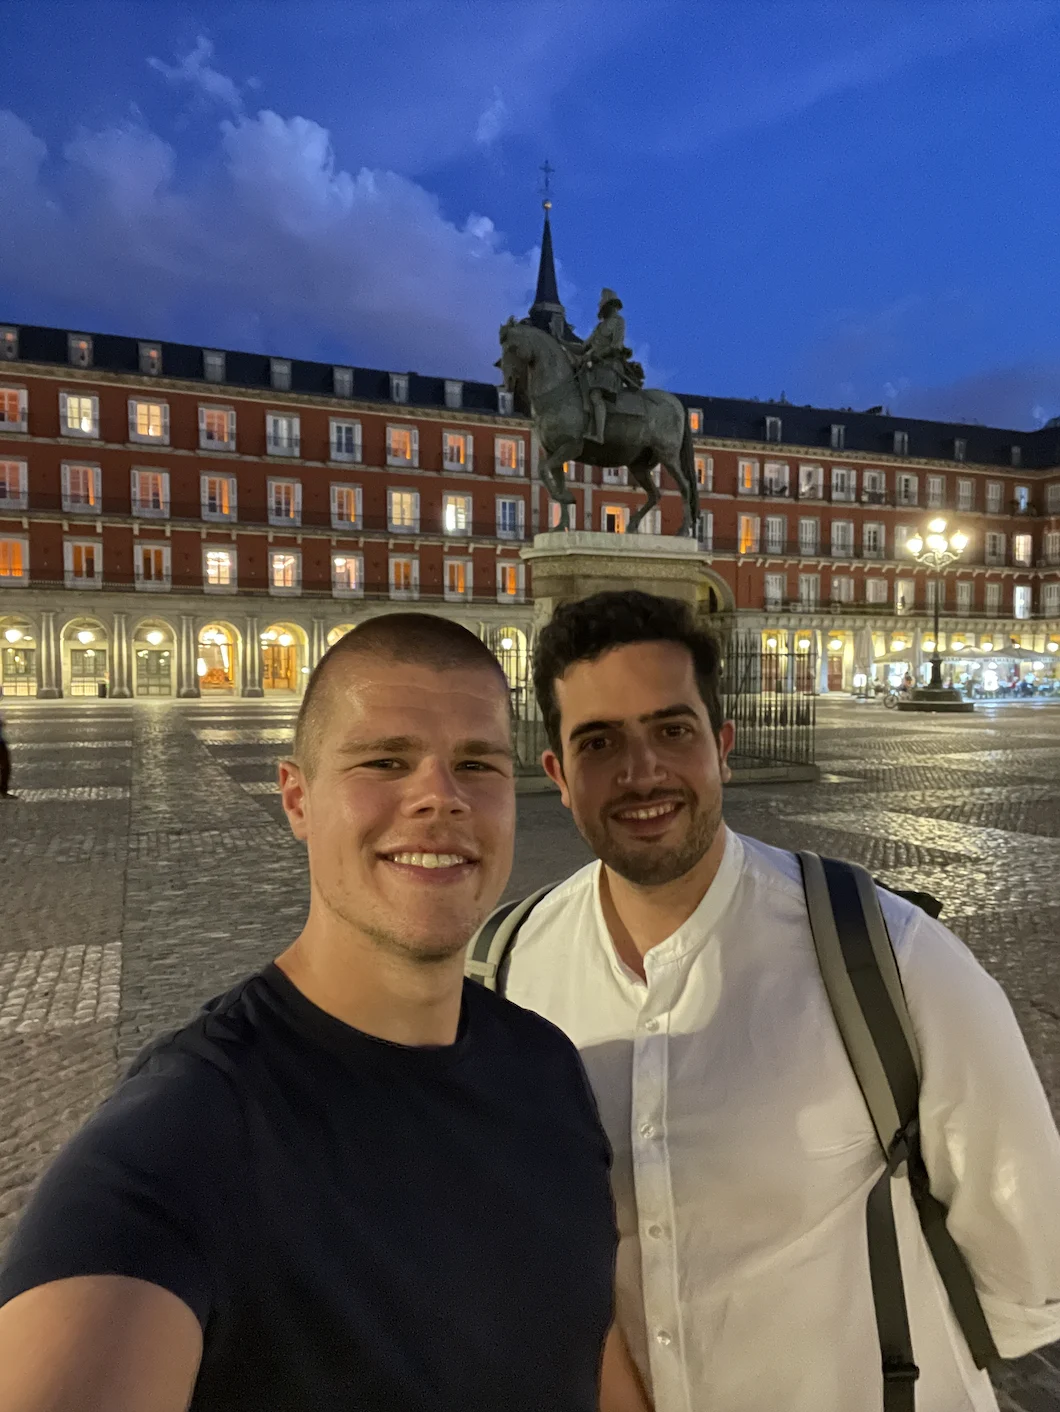 Gregor and a colleague visiting some Spanish landmarks.